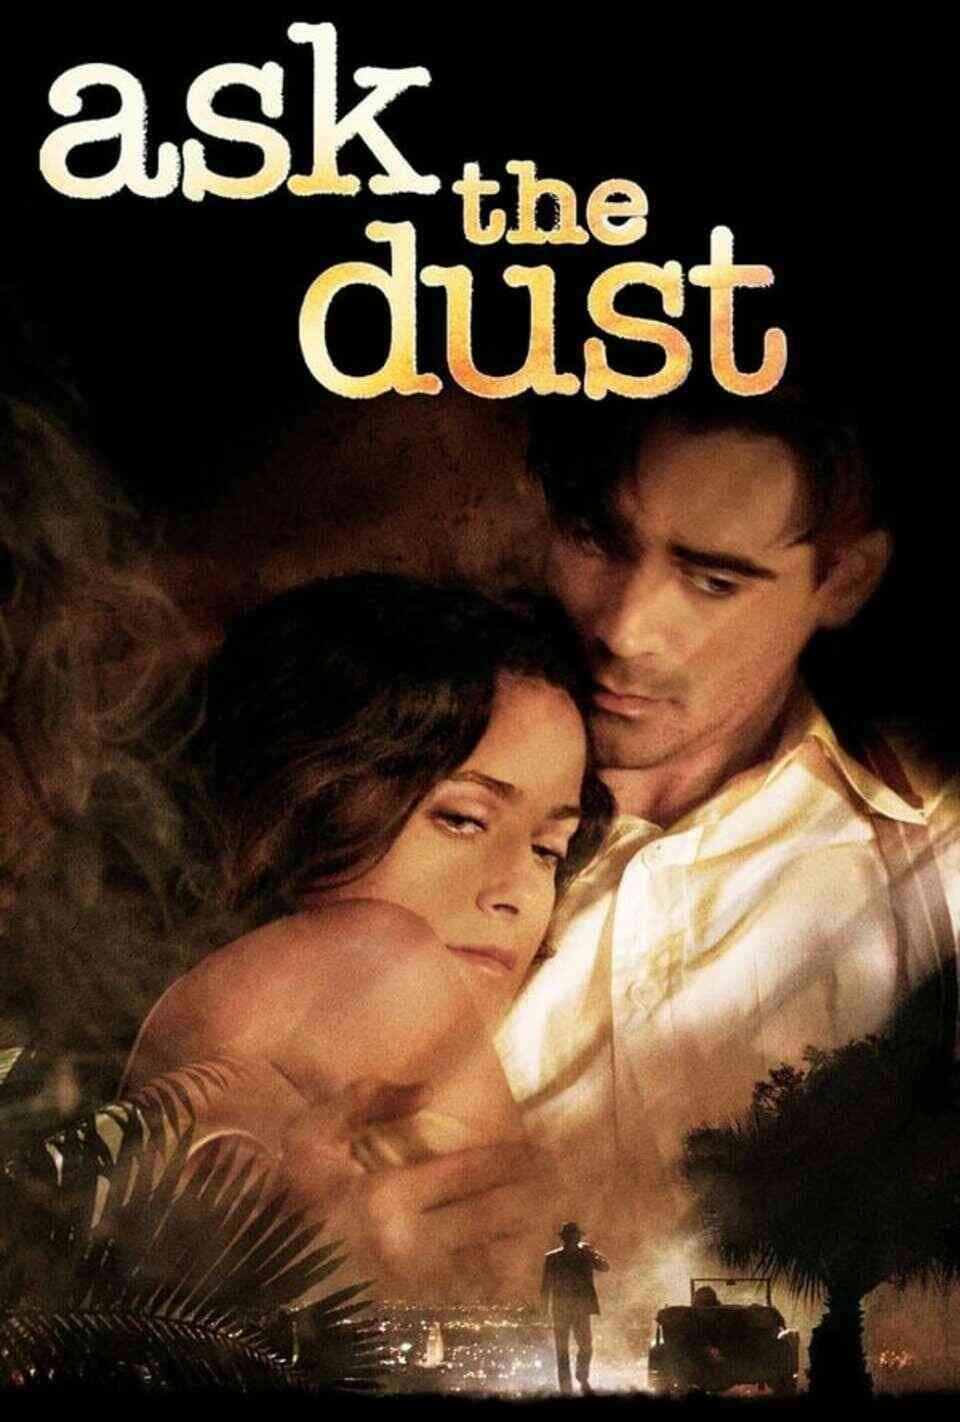 Read Ask the Dust screenplay (poster)